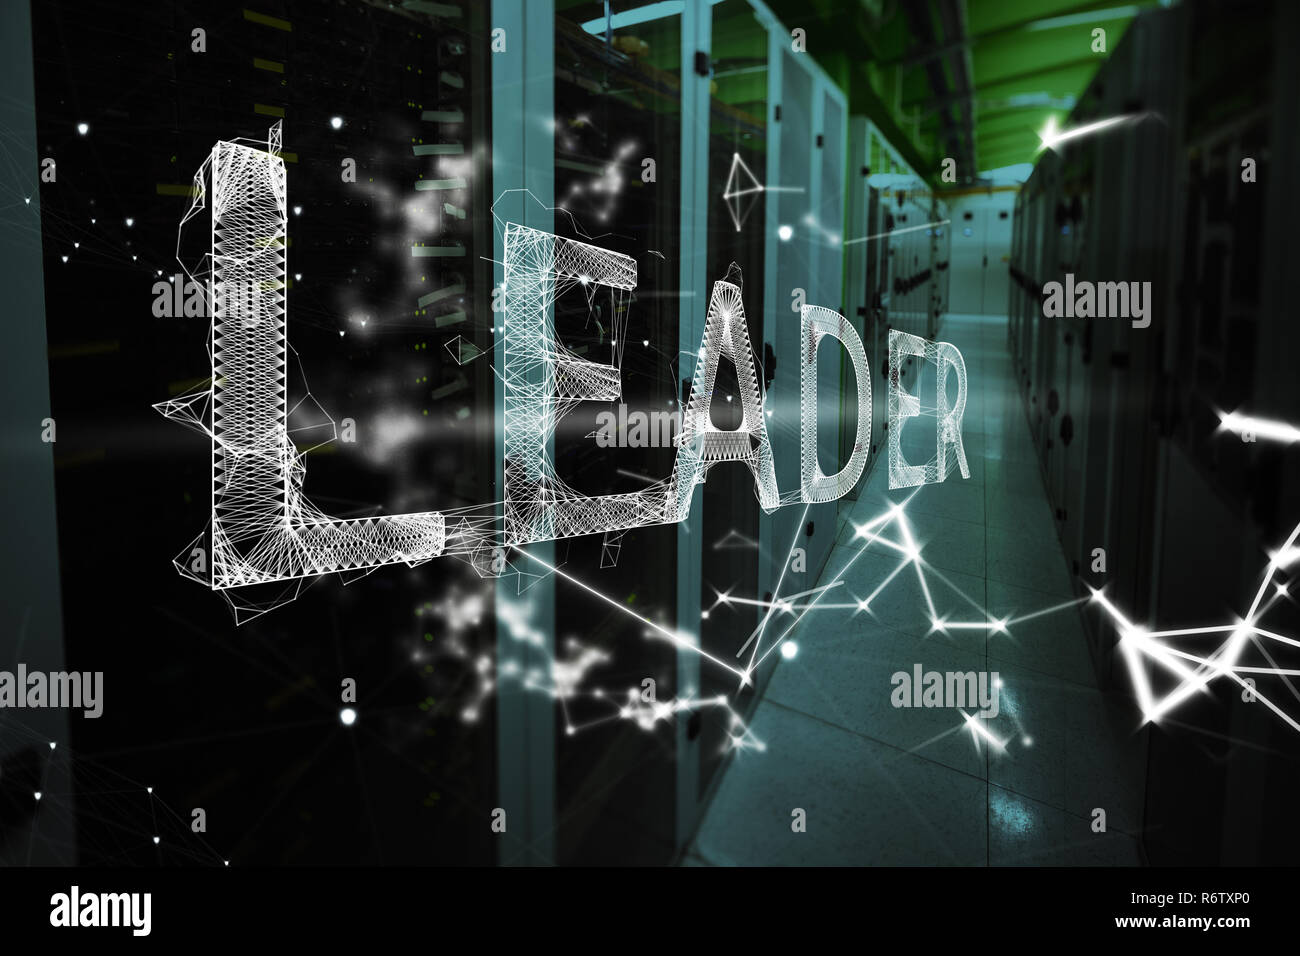 Graphic image of leader text against empty server room Stock Photo